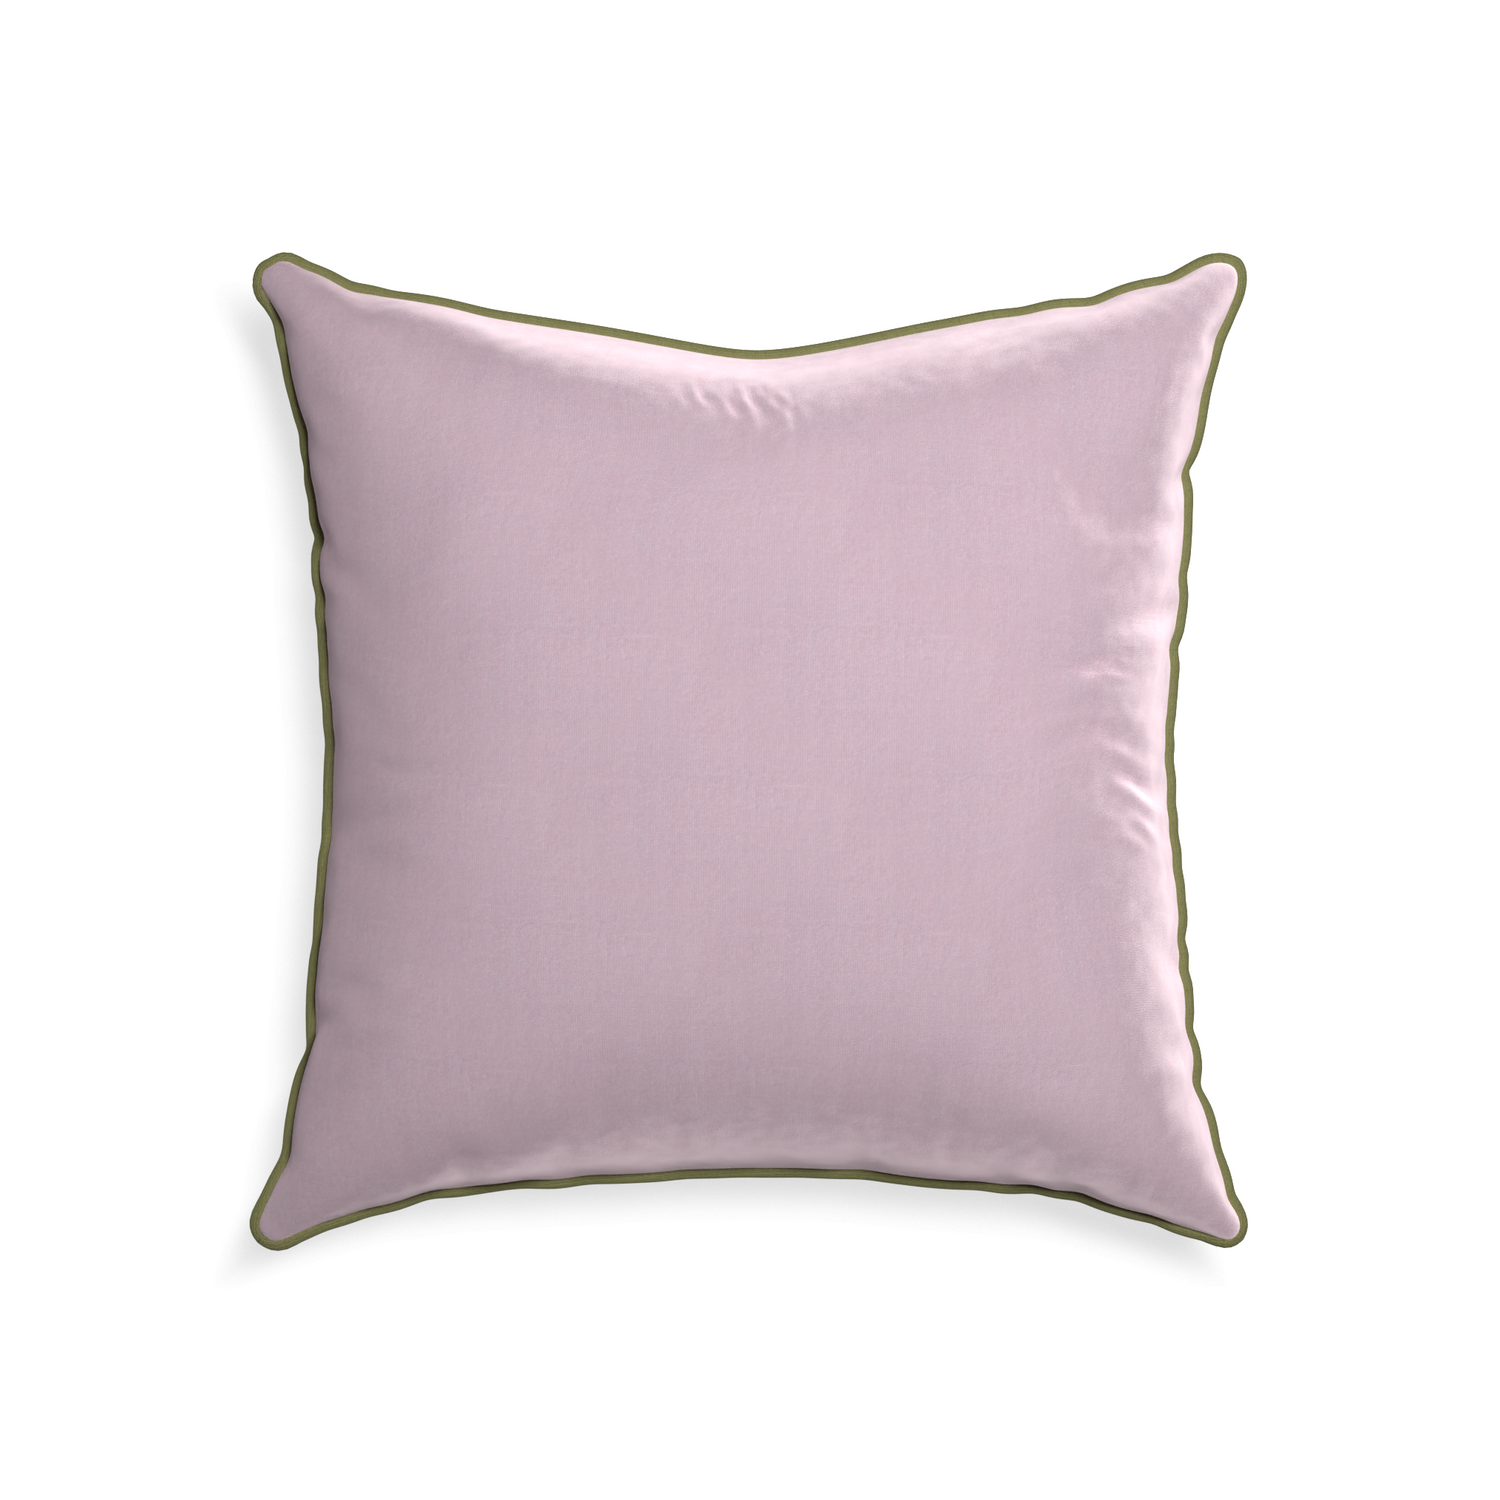 22-square lilac velvet custom pillow with moss piping on white background